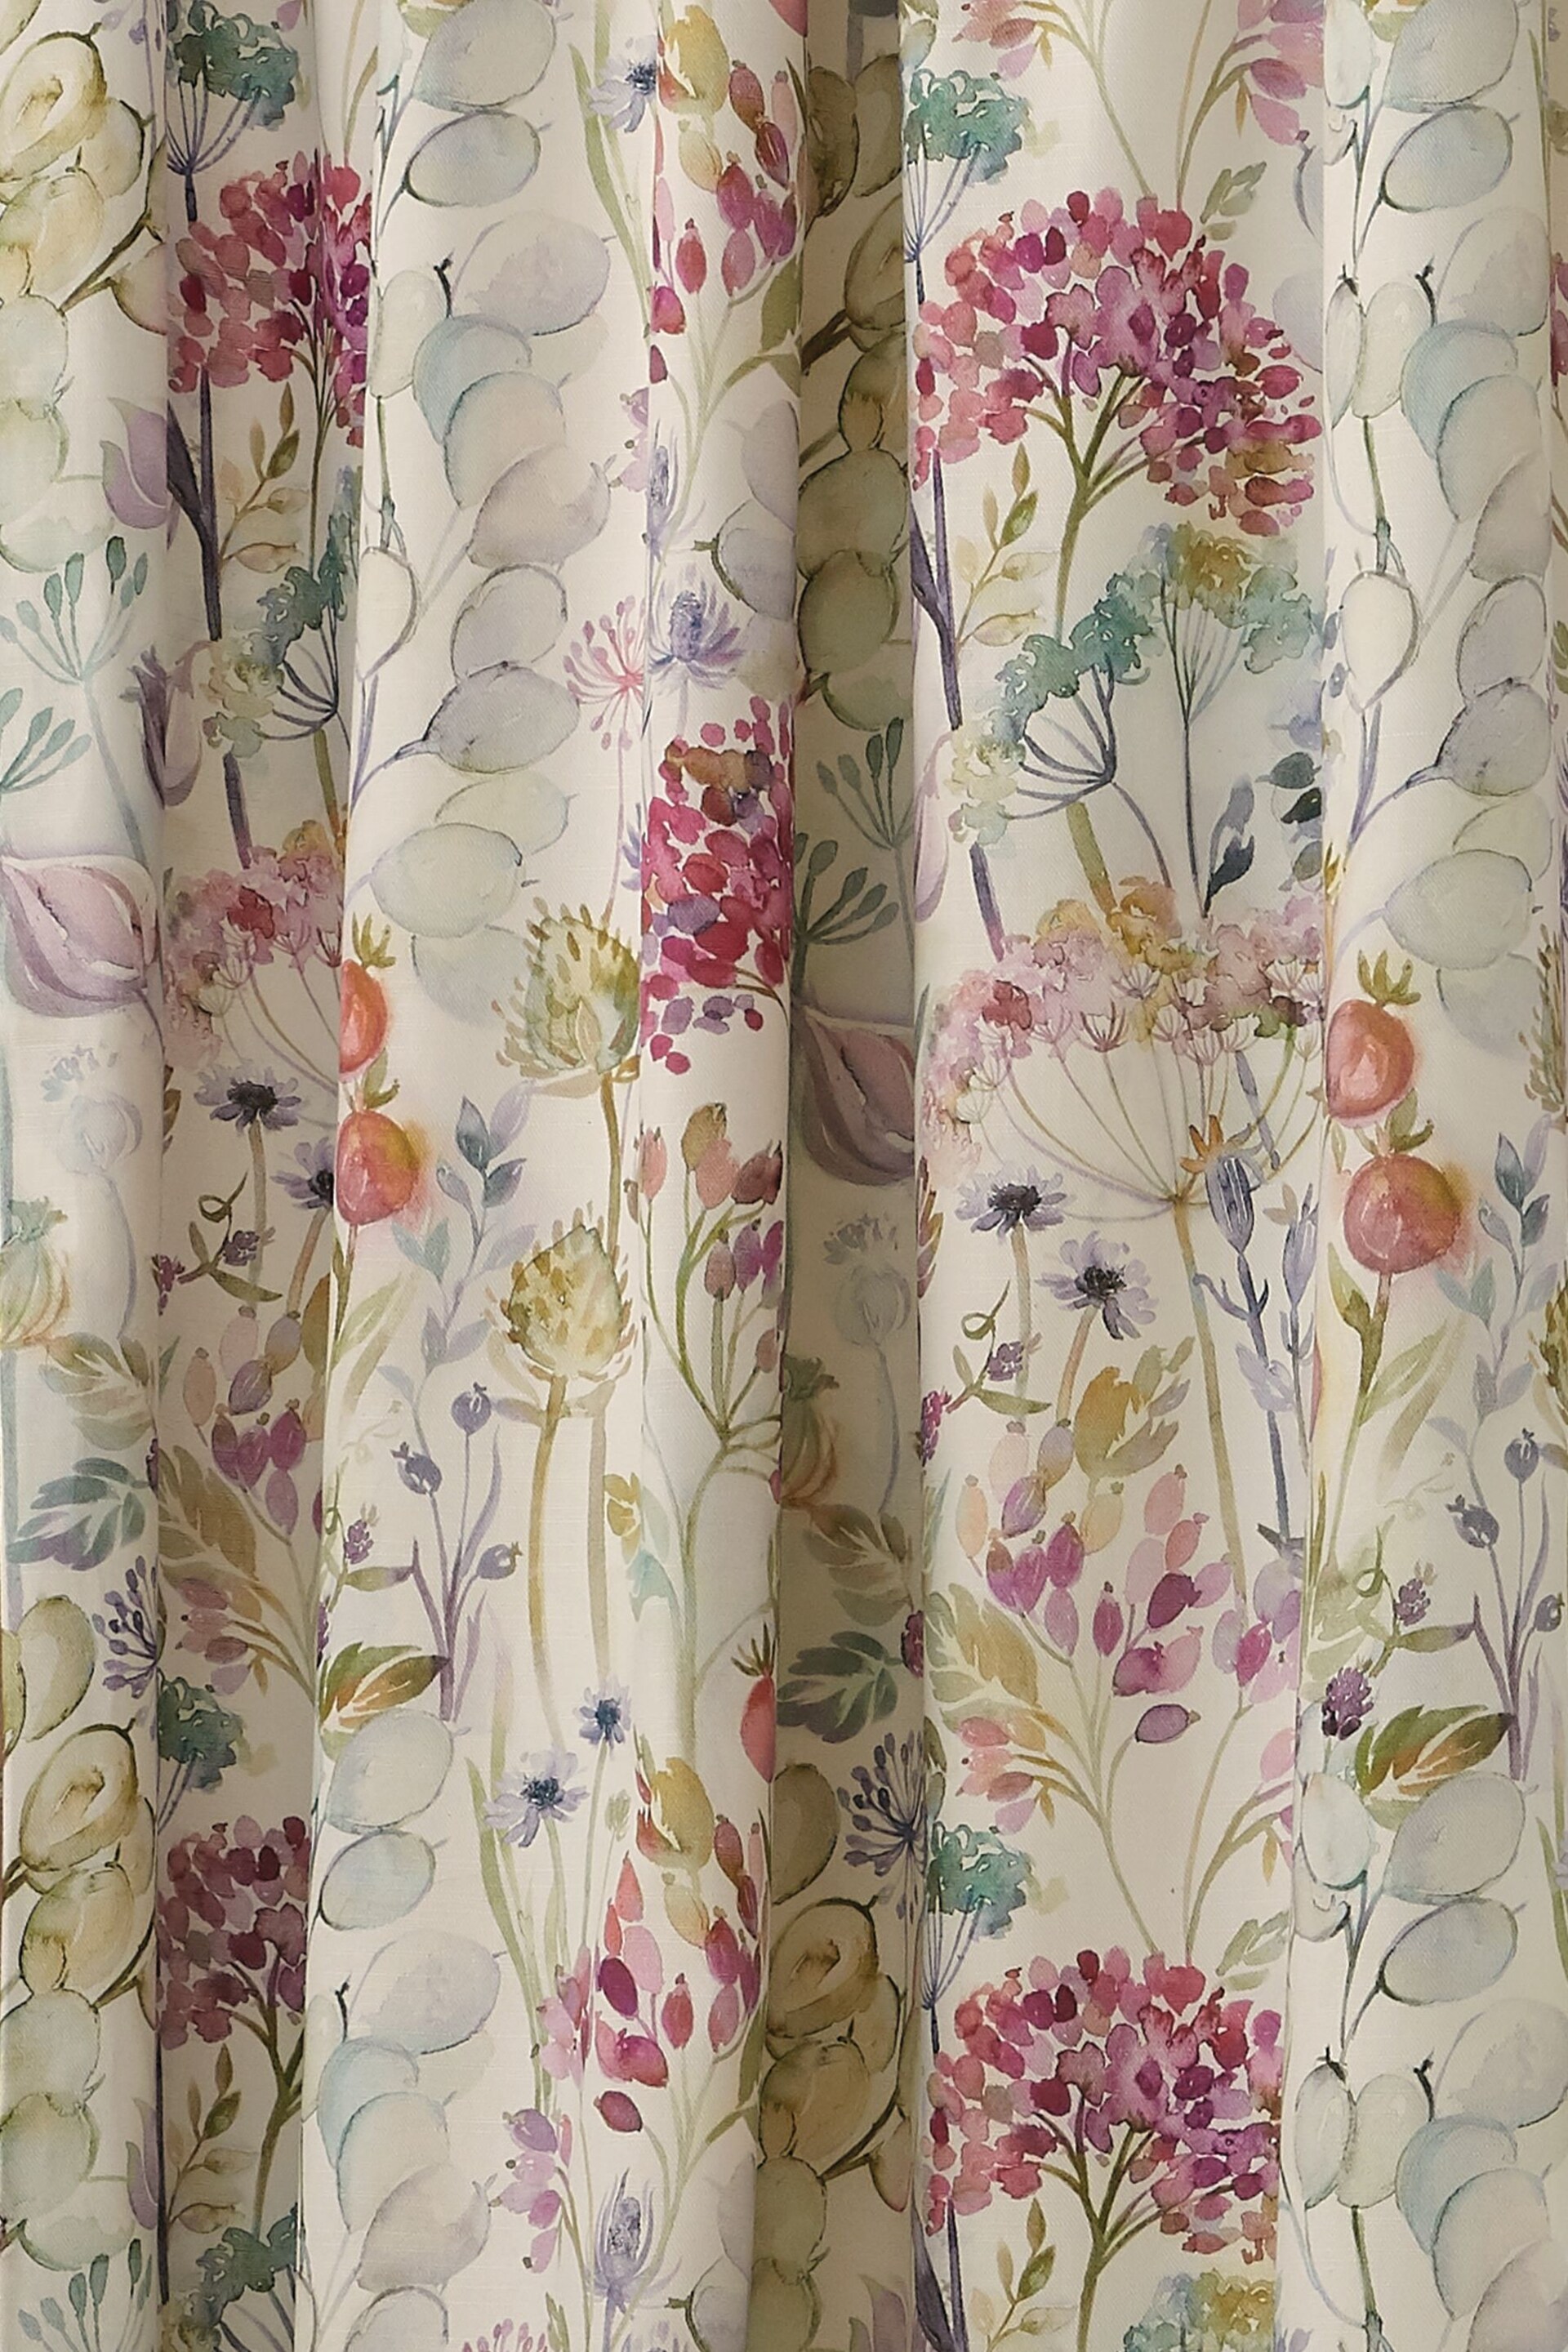 Voyage Multi Country Hedge Floral Lined Pencil Pleat Curtains - Image 2 of 2